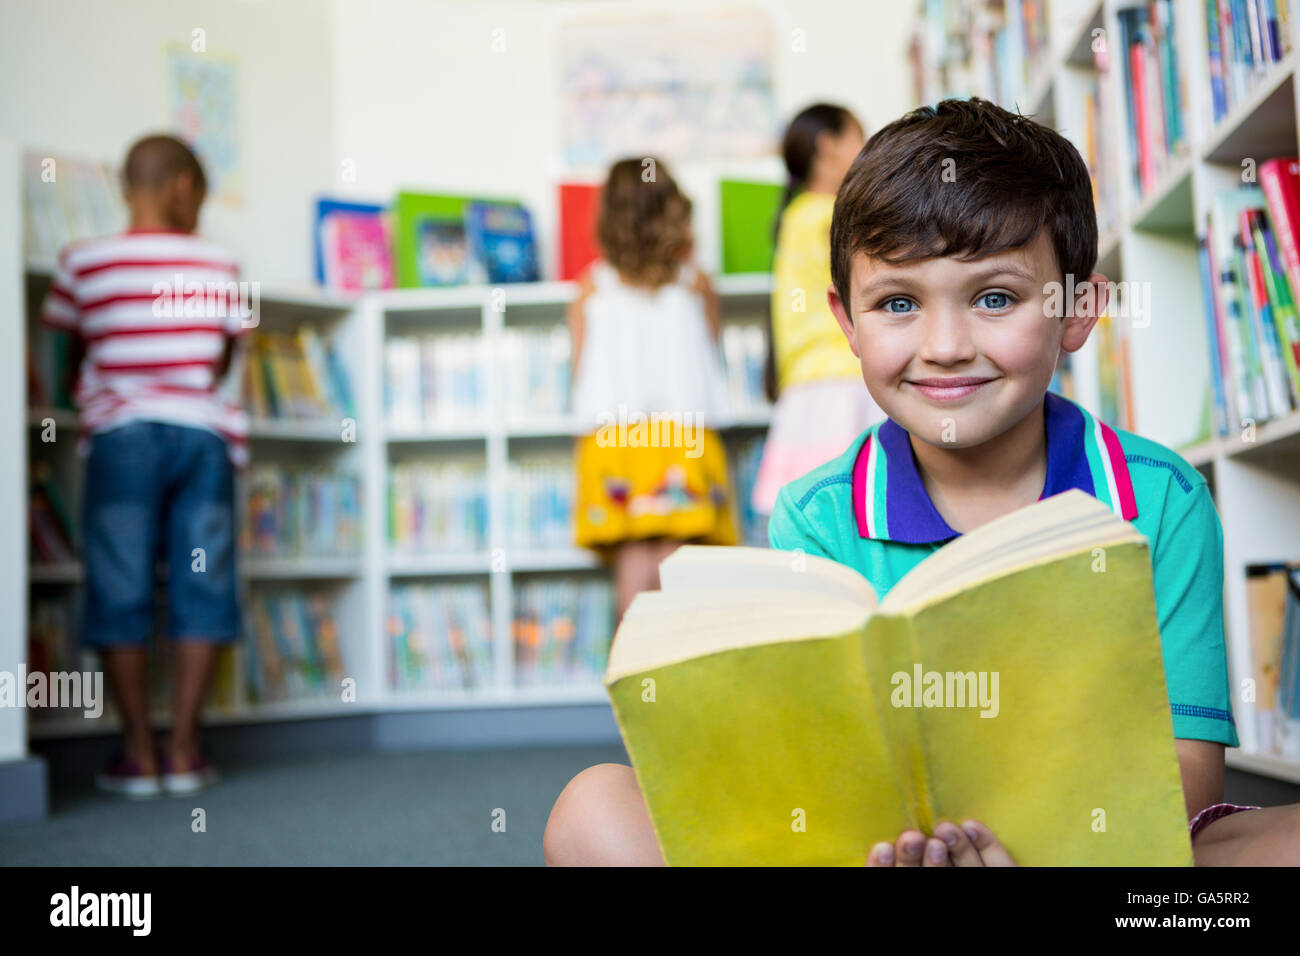 Portrait of boy holding book at school library Stock Photo